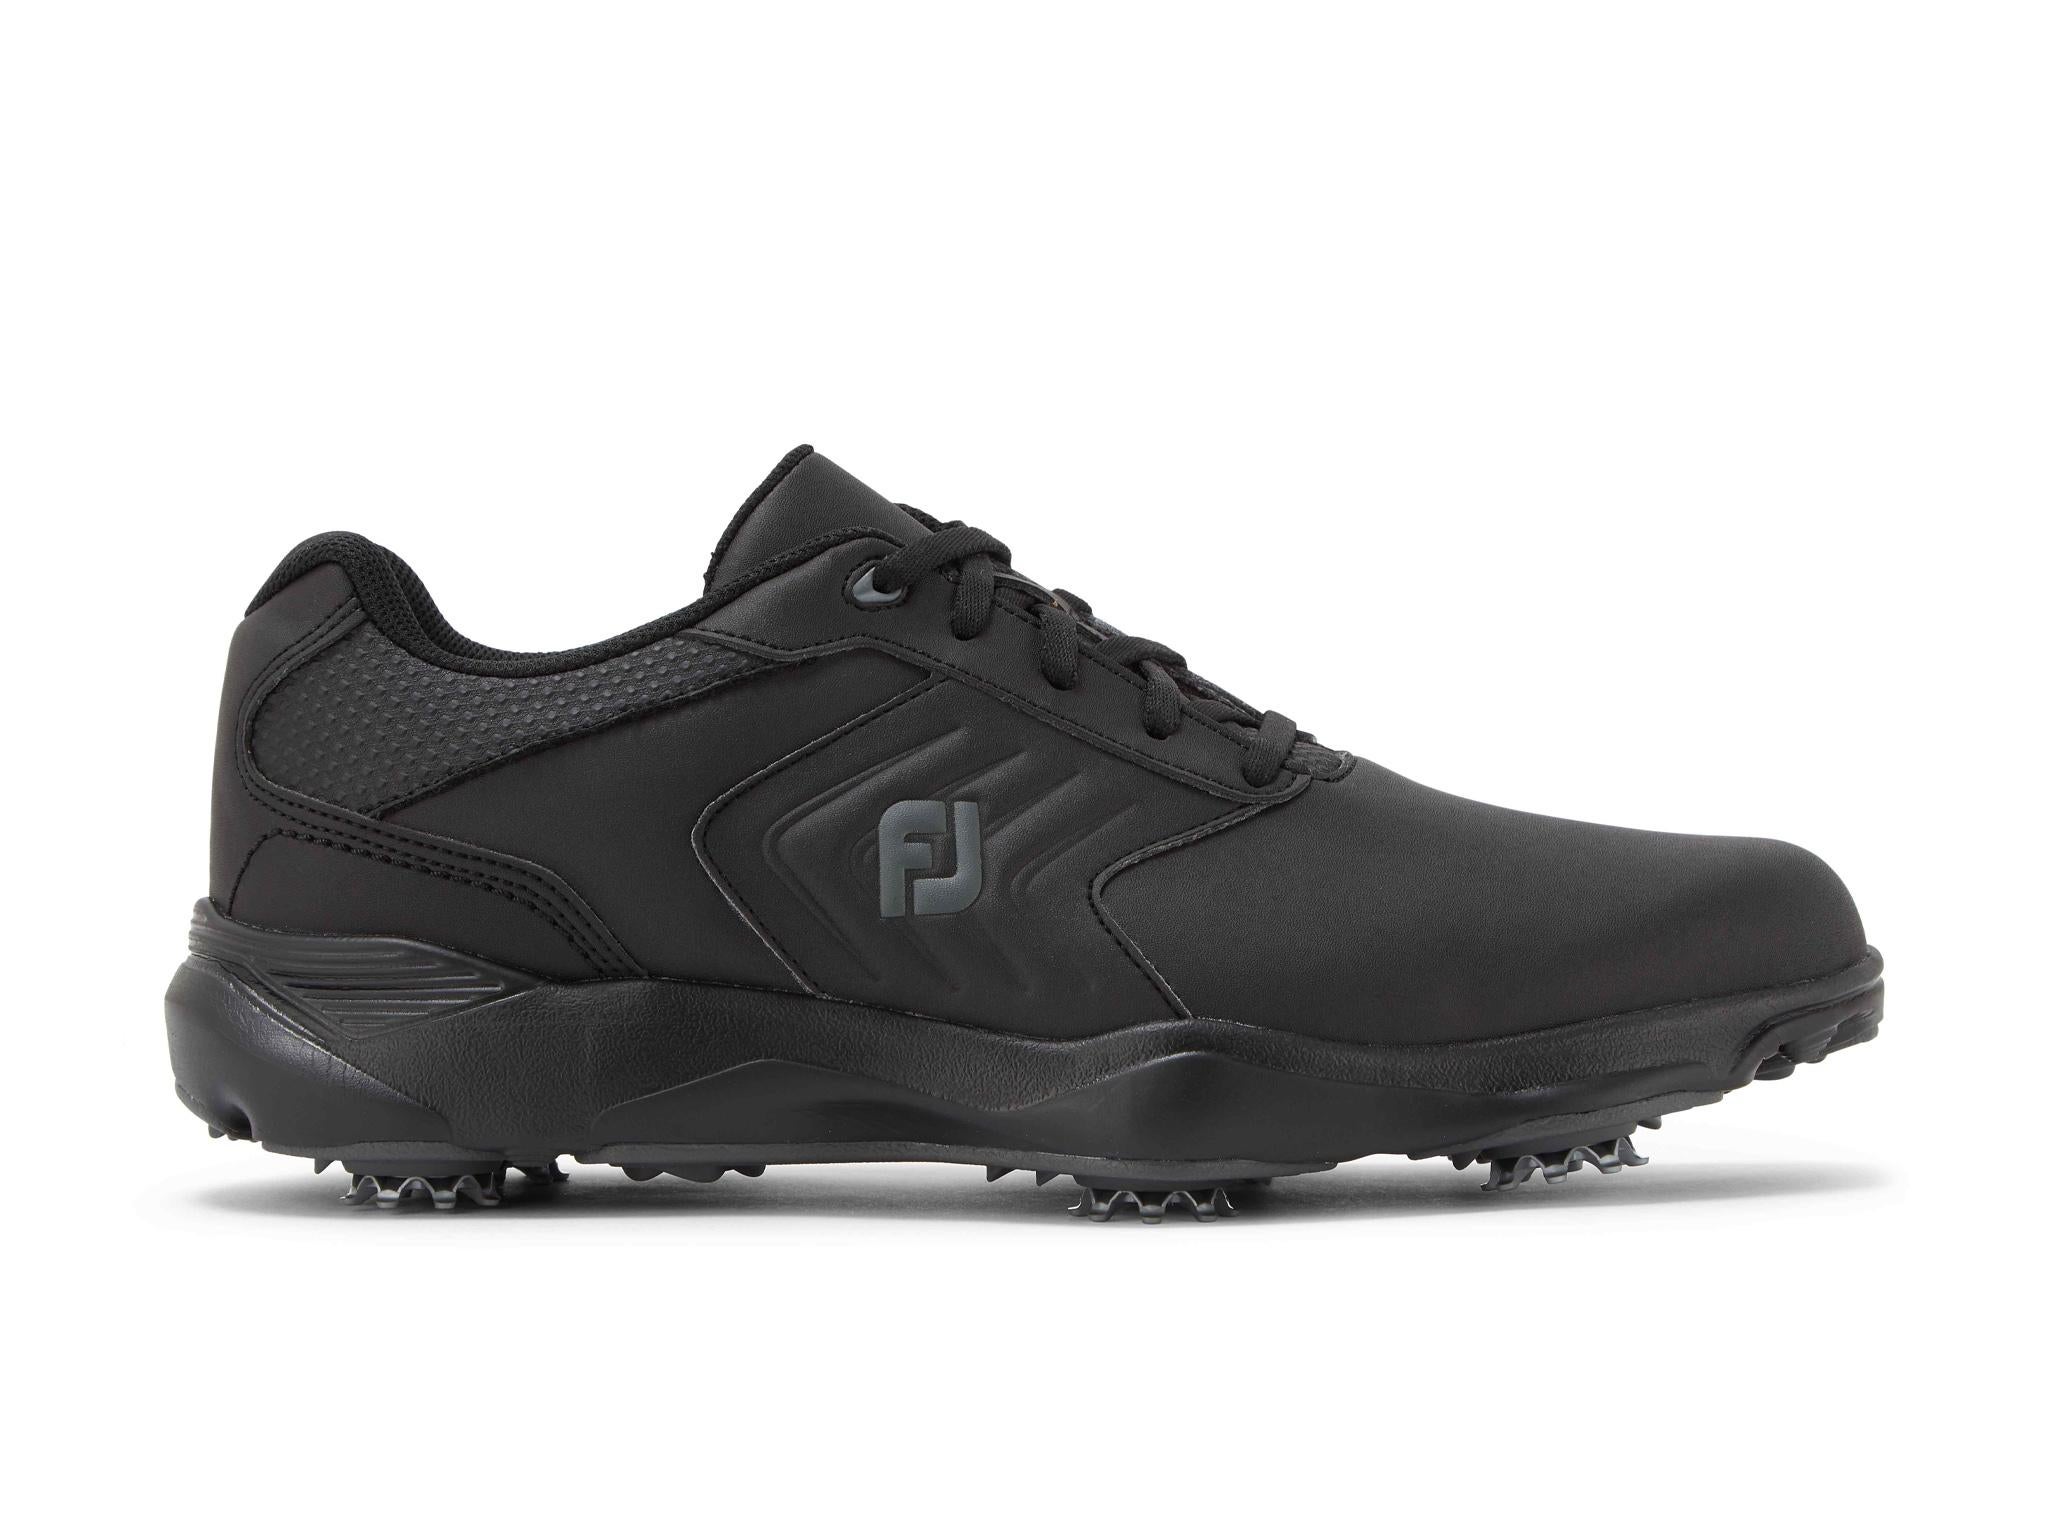 Best men's golf shoes 2020: Spiked 